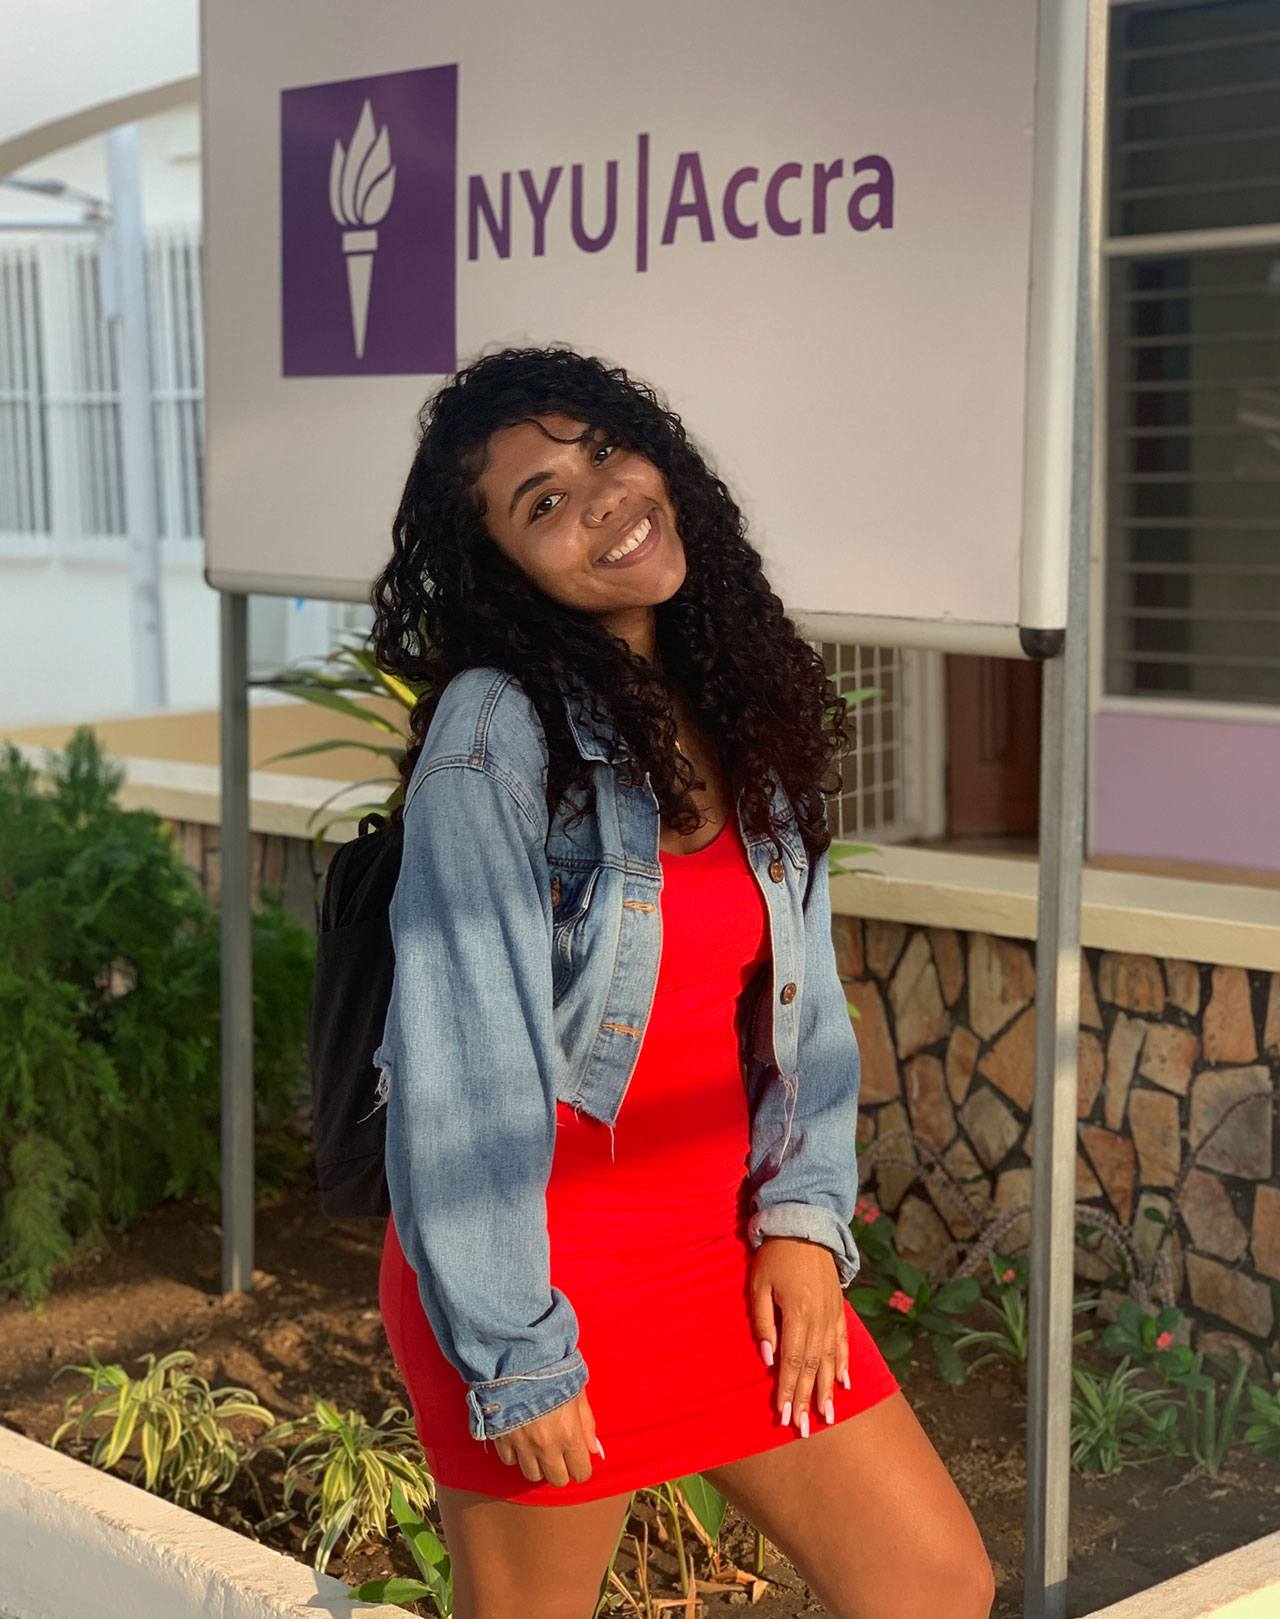 Elizabeth Pontes posing for a photo infront an NYU Accra sign